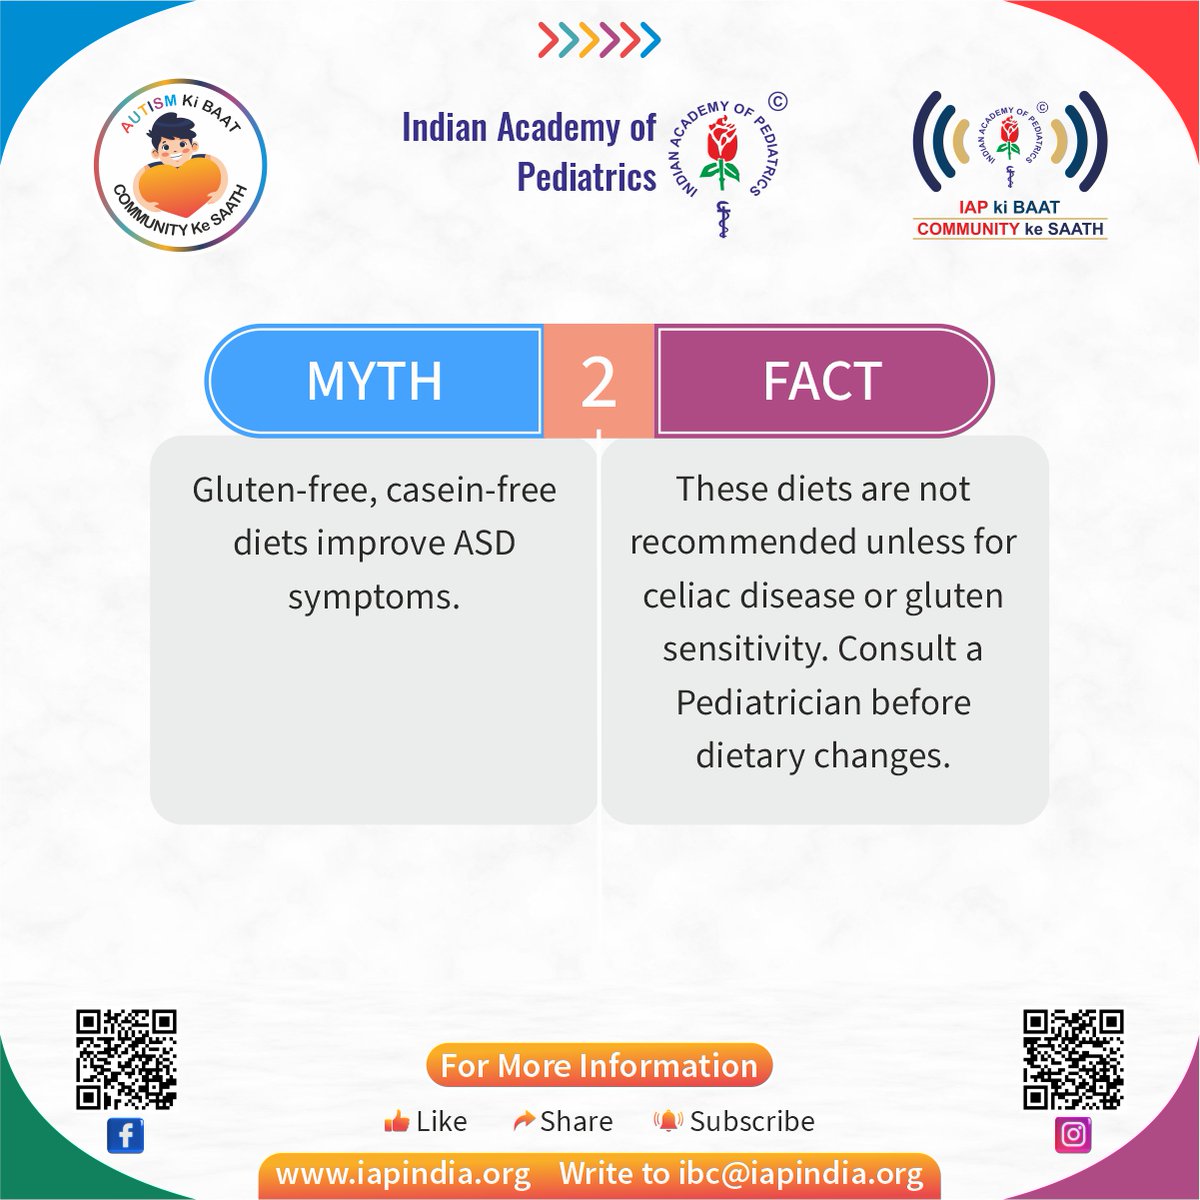 Separating 𝐌𝐘𝐓𝐇𝐒 from 𝐅𝐀𝐂𝐓𝐒 🌟 🩺 Consult a 𝐏𝐞𝐝𝐢𝐚𝐭𝐫𝐢𝐜𝐢𝐚𝐧 before making any dietary changes. #iapkibaat #iap #indianacademyofpediatrics #pediatrics #pediatricians #doctors #medicine #childcare #childhealth #healthcare #autismawareness #autism